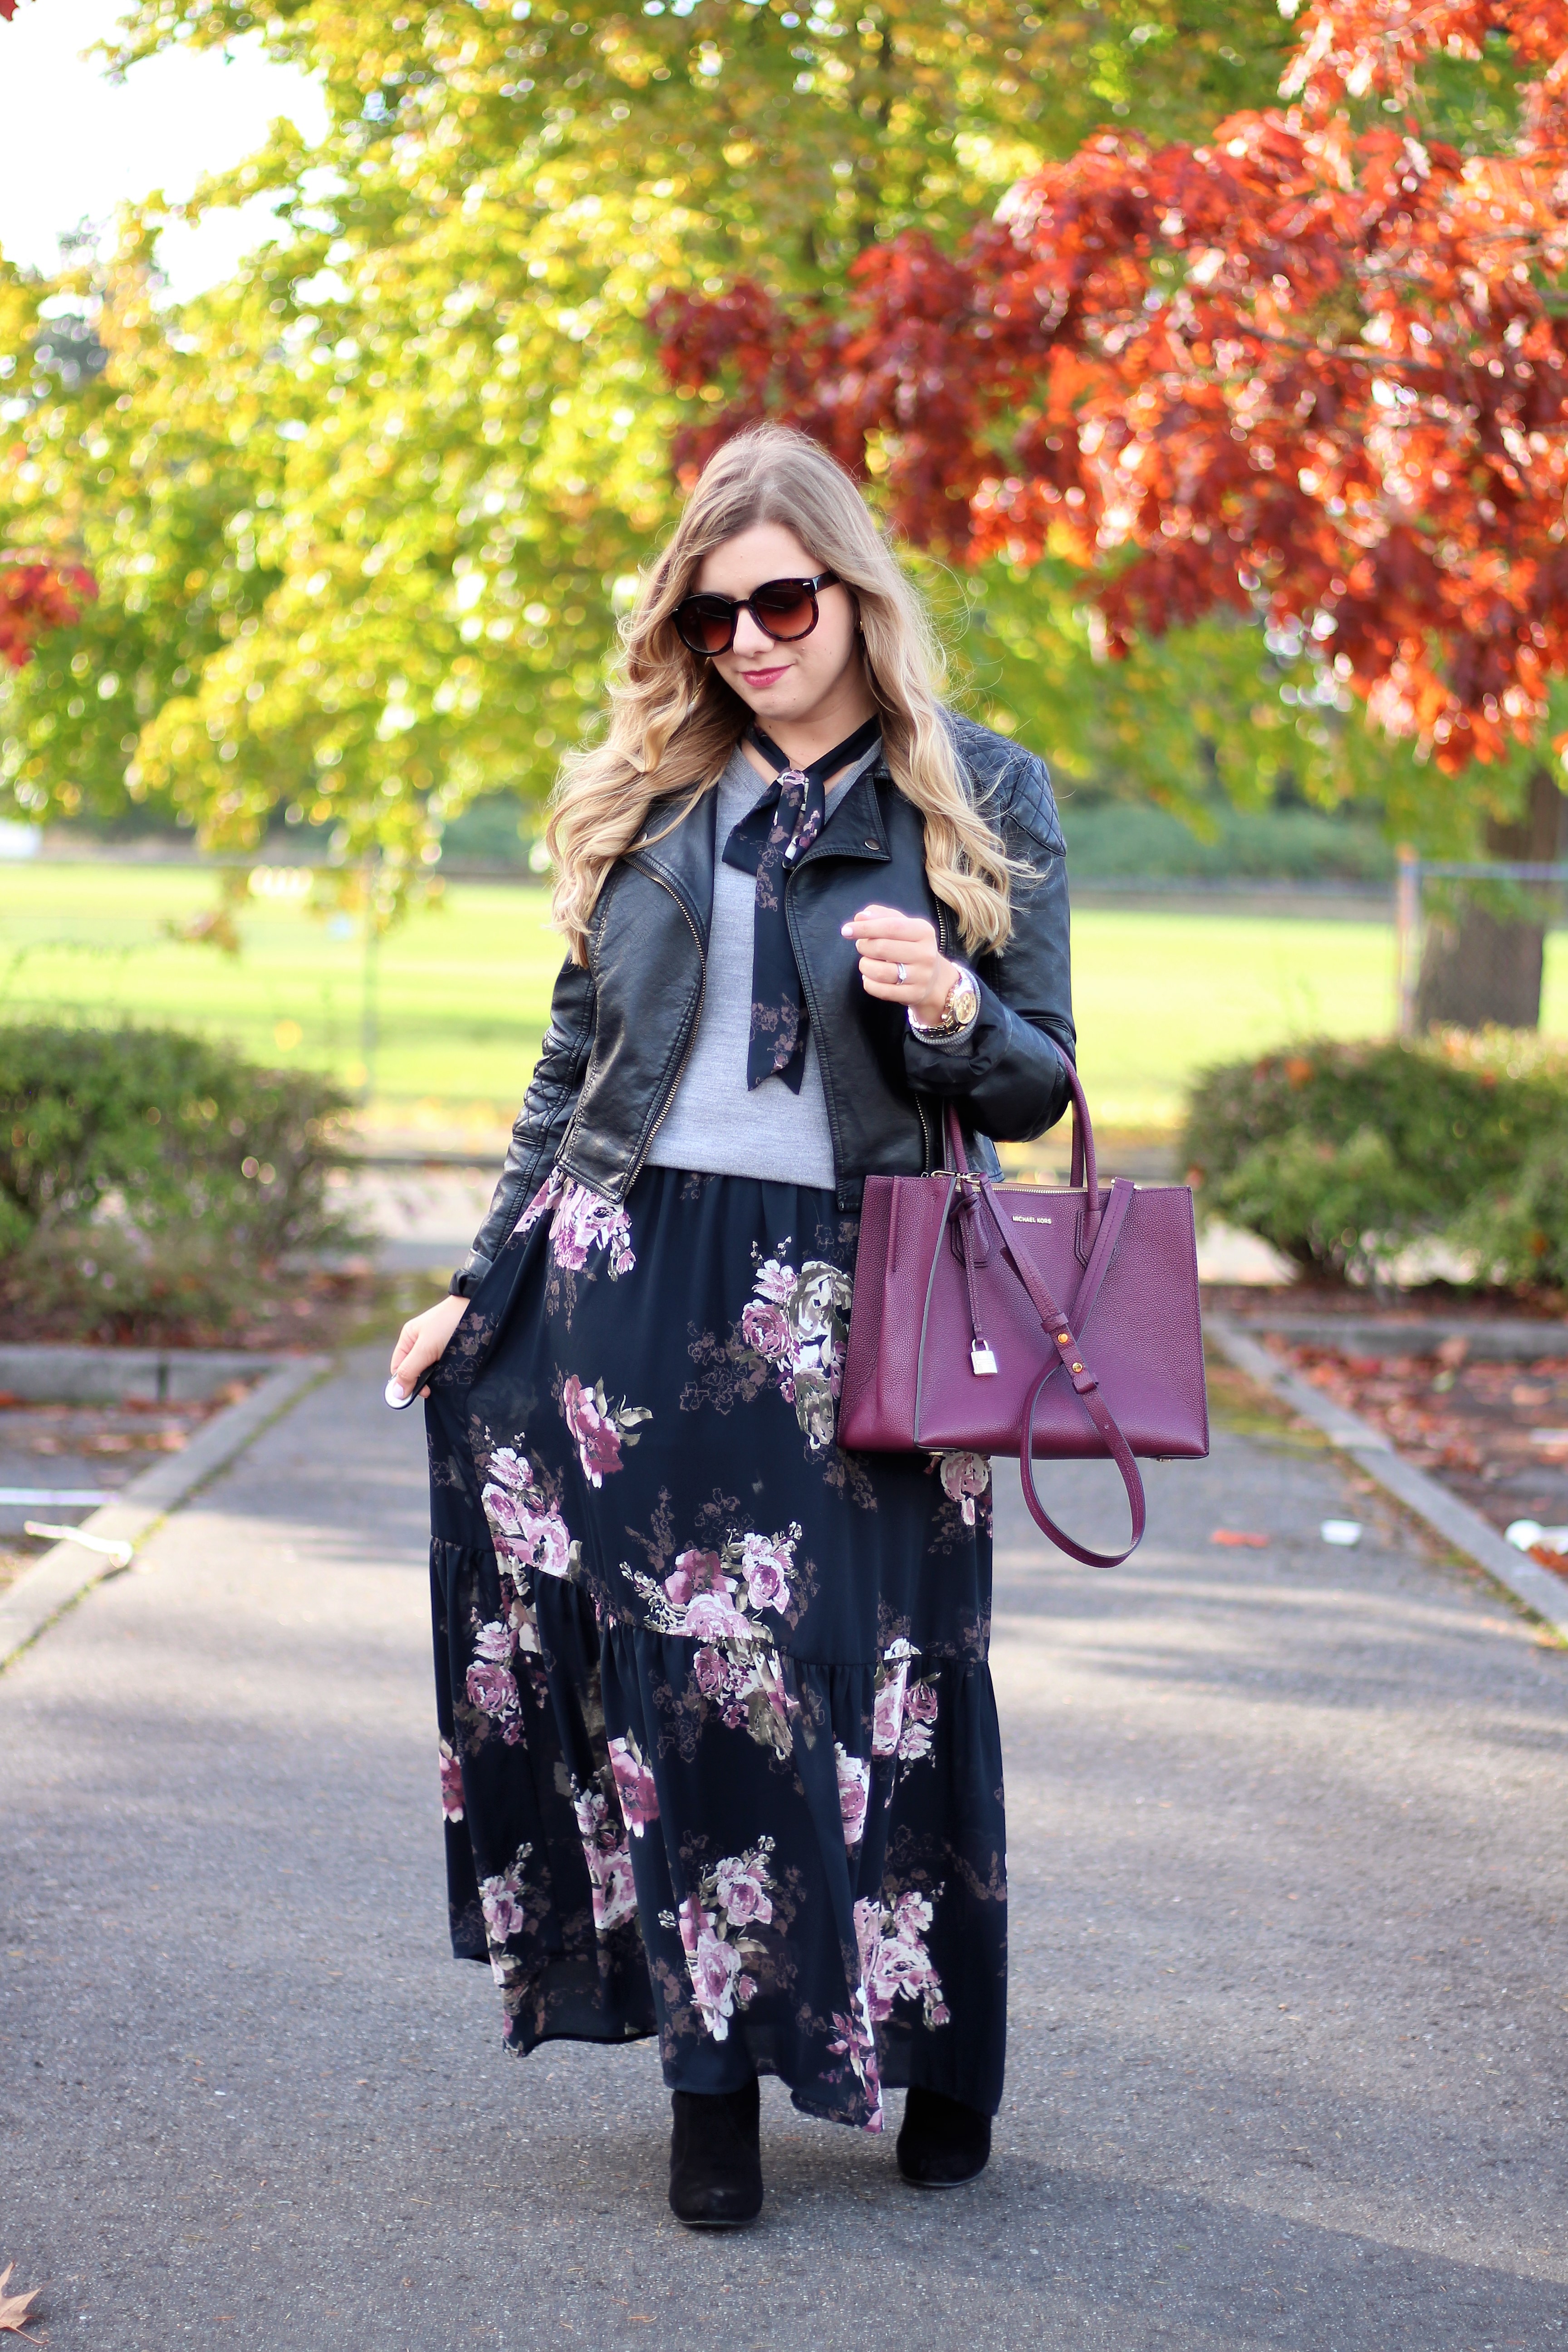 floral in fall - the stockplace dress - easy fall outfit - cute fall outfit - winter maxi dress